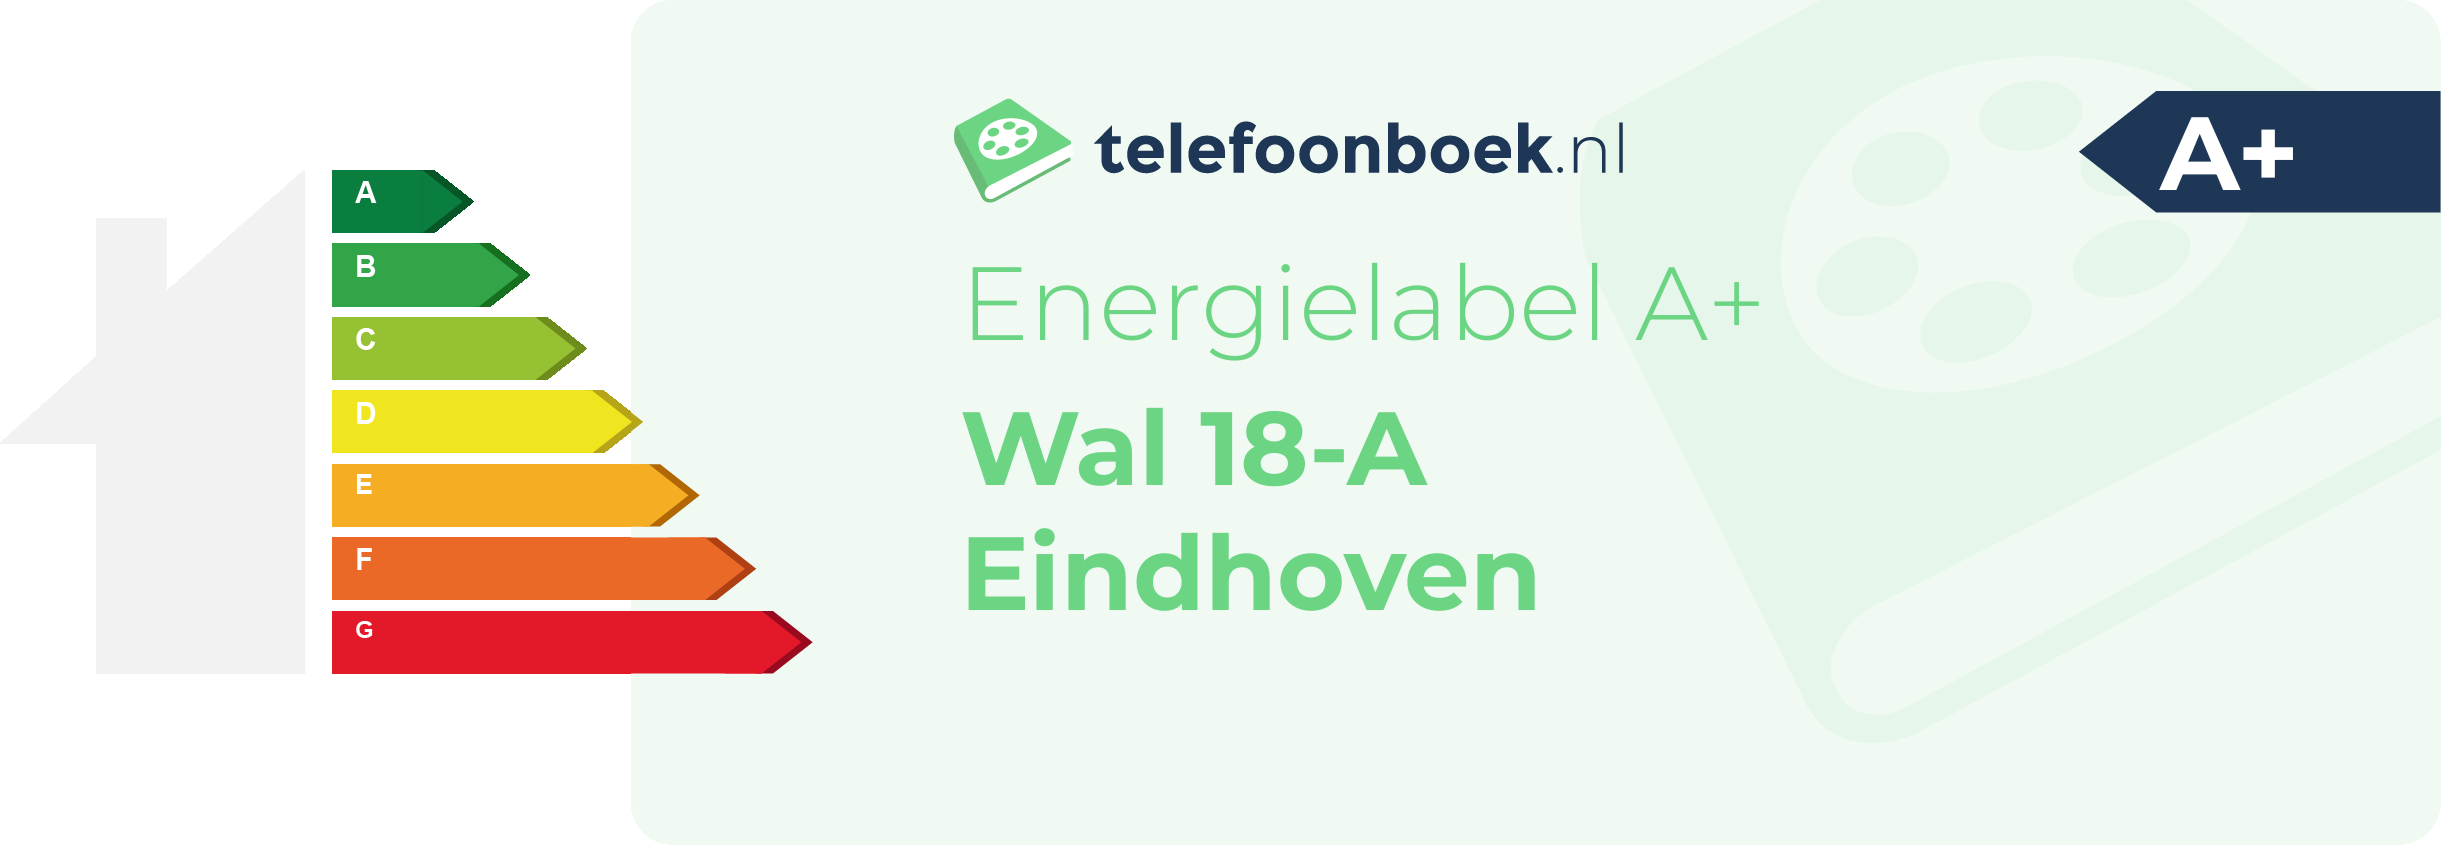 Energielabel Wal 18-A Eindhoven